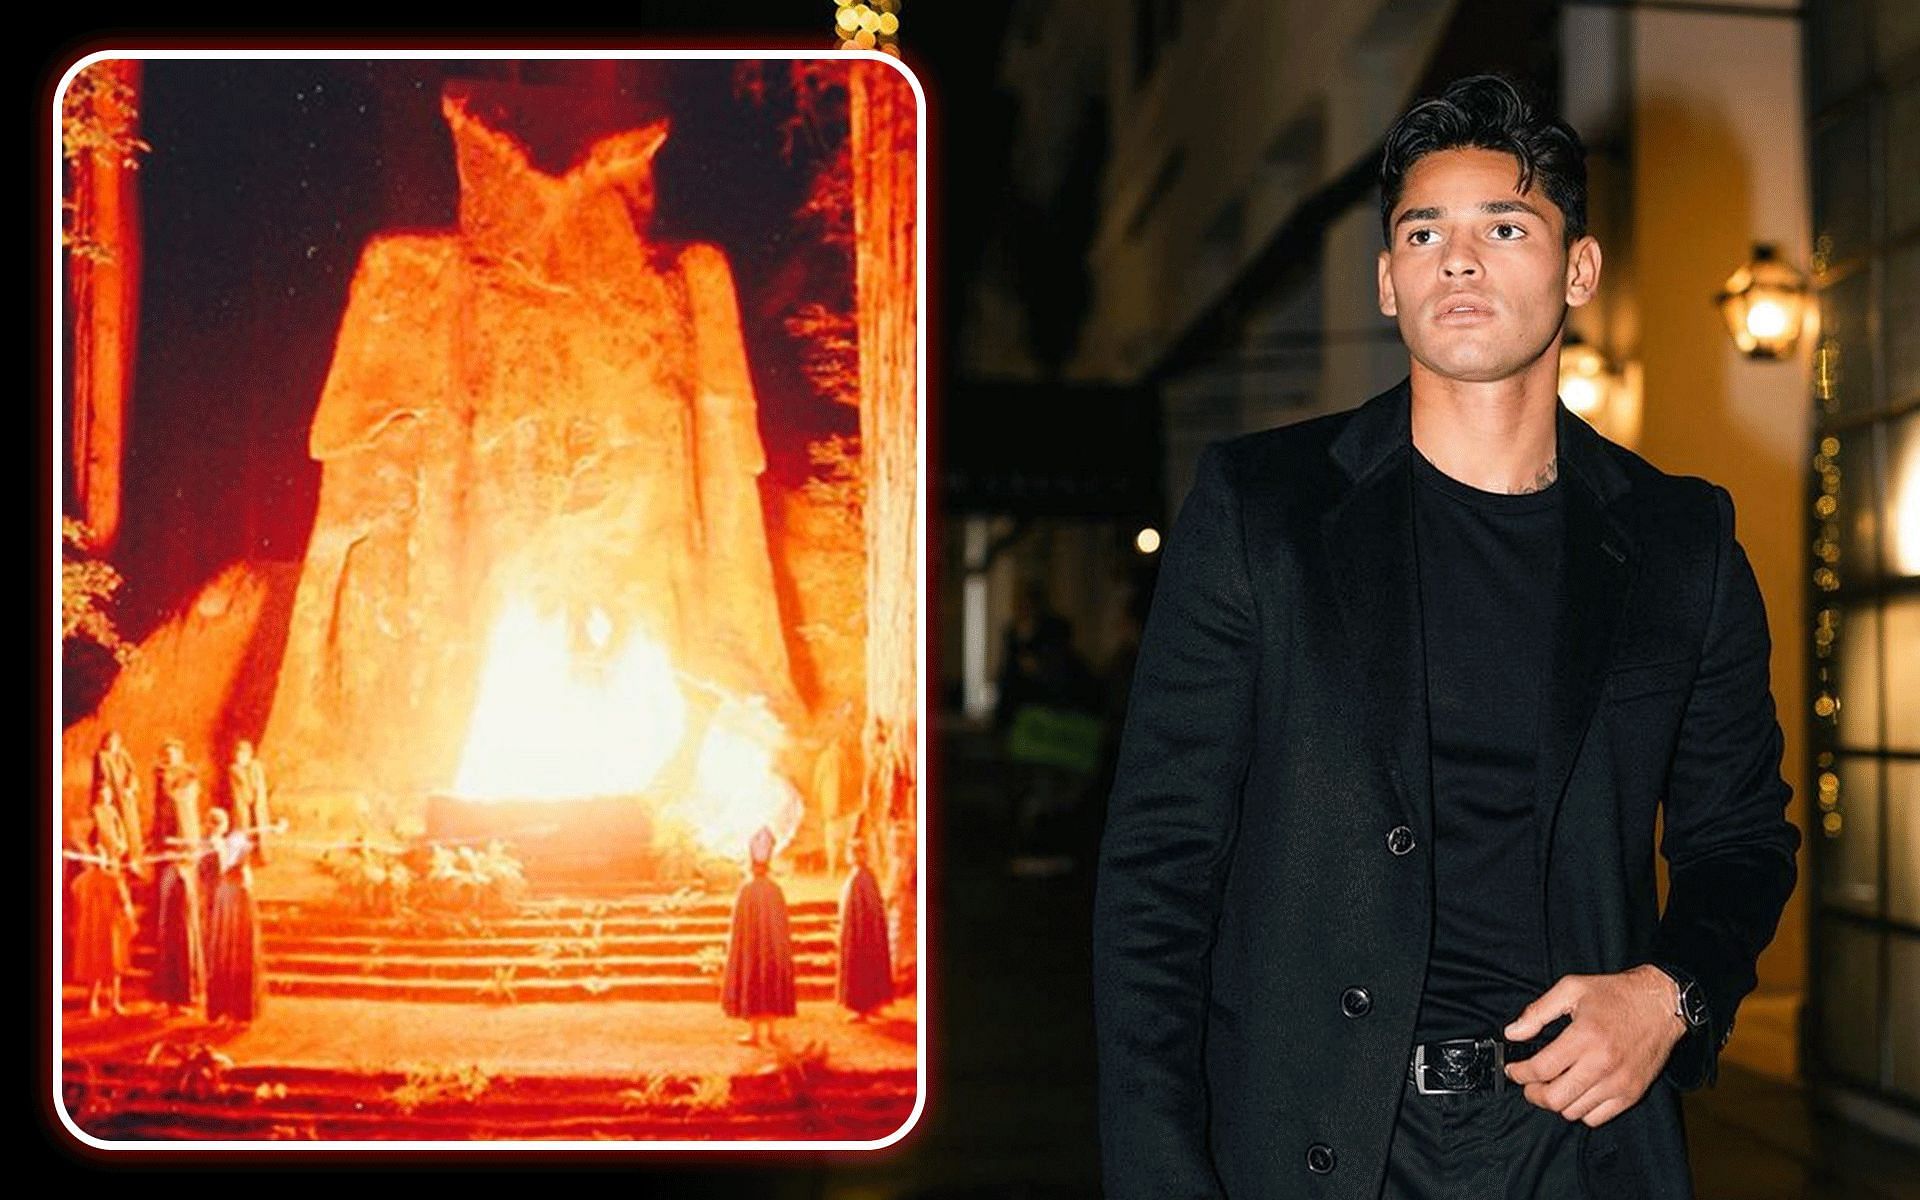 Ryan Garcia claims seeing beast coming out of San Francisco bridge amid 